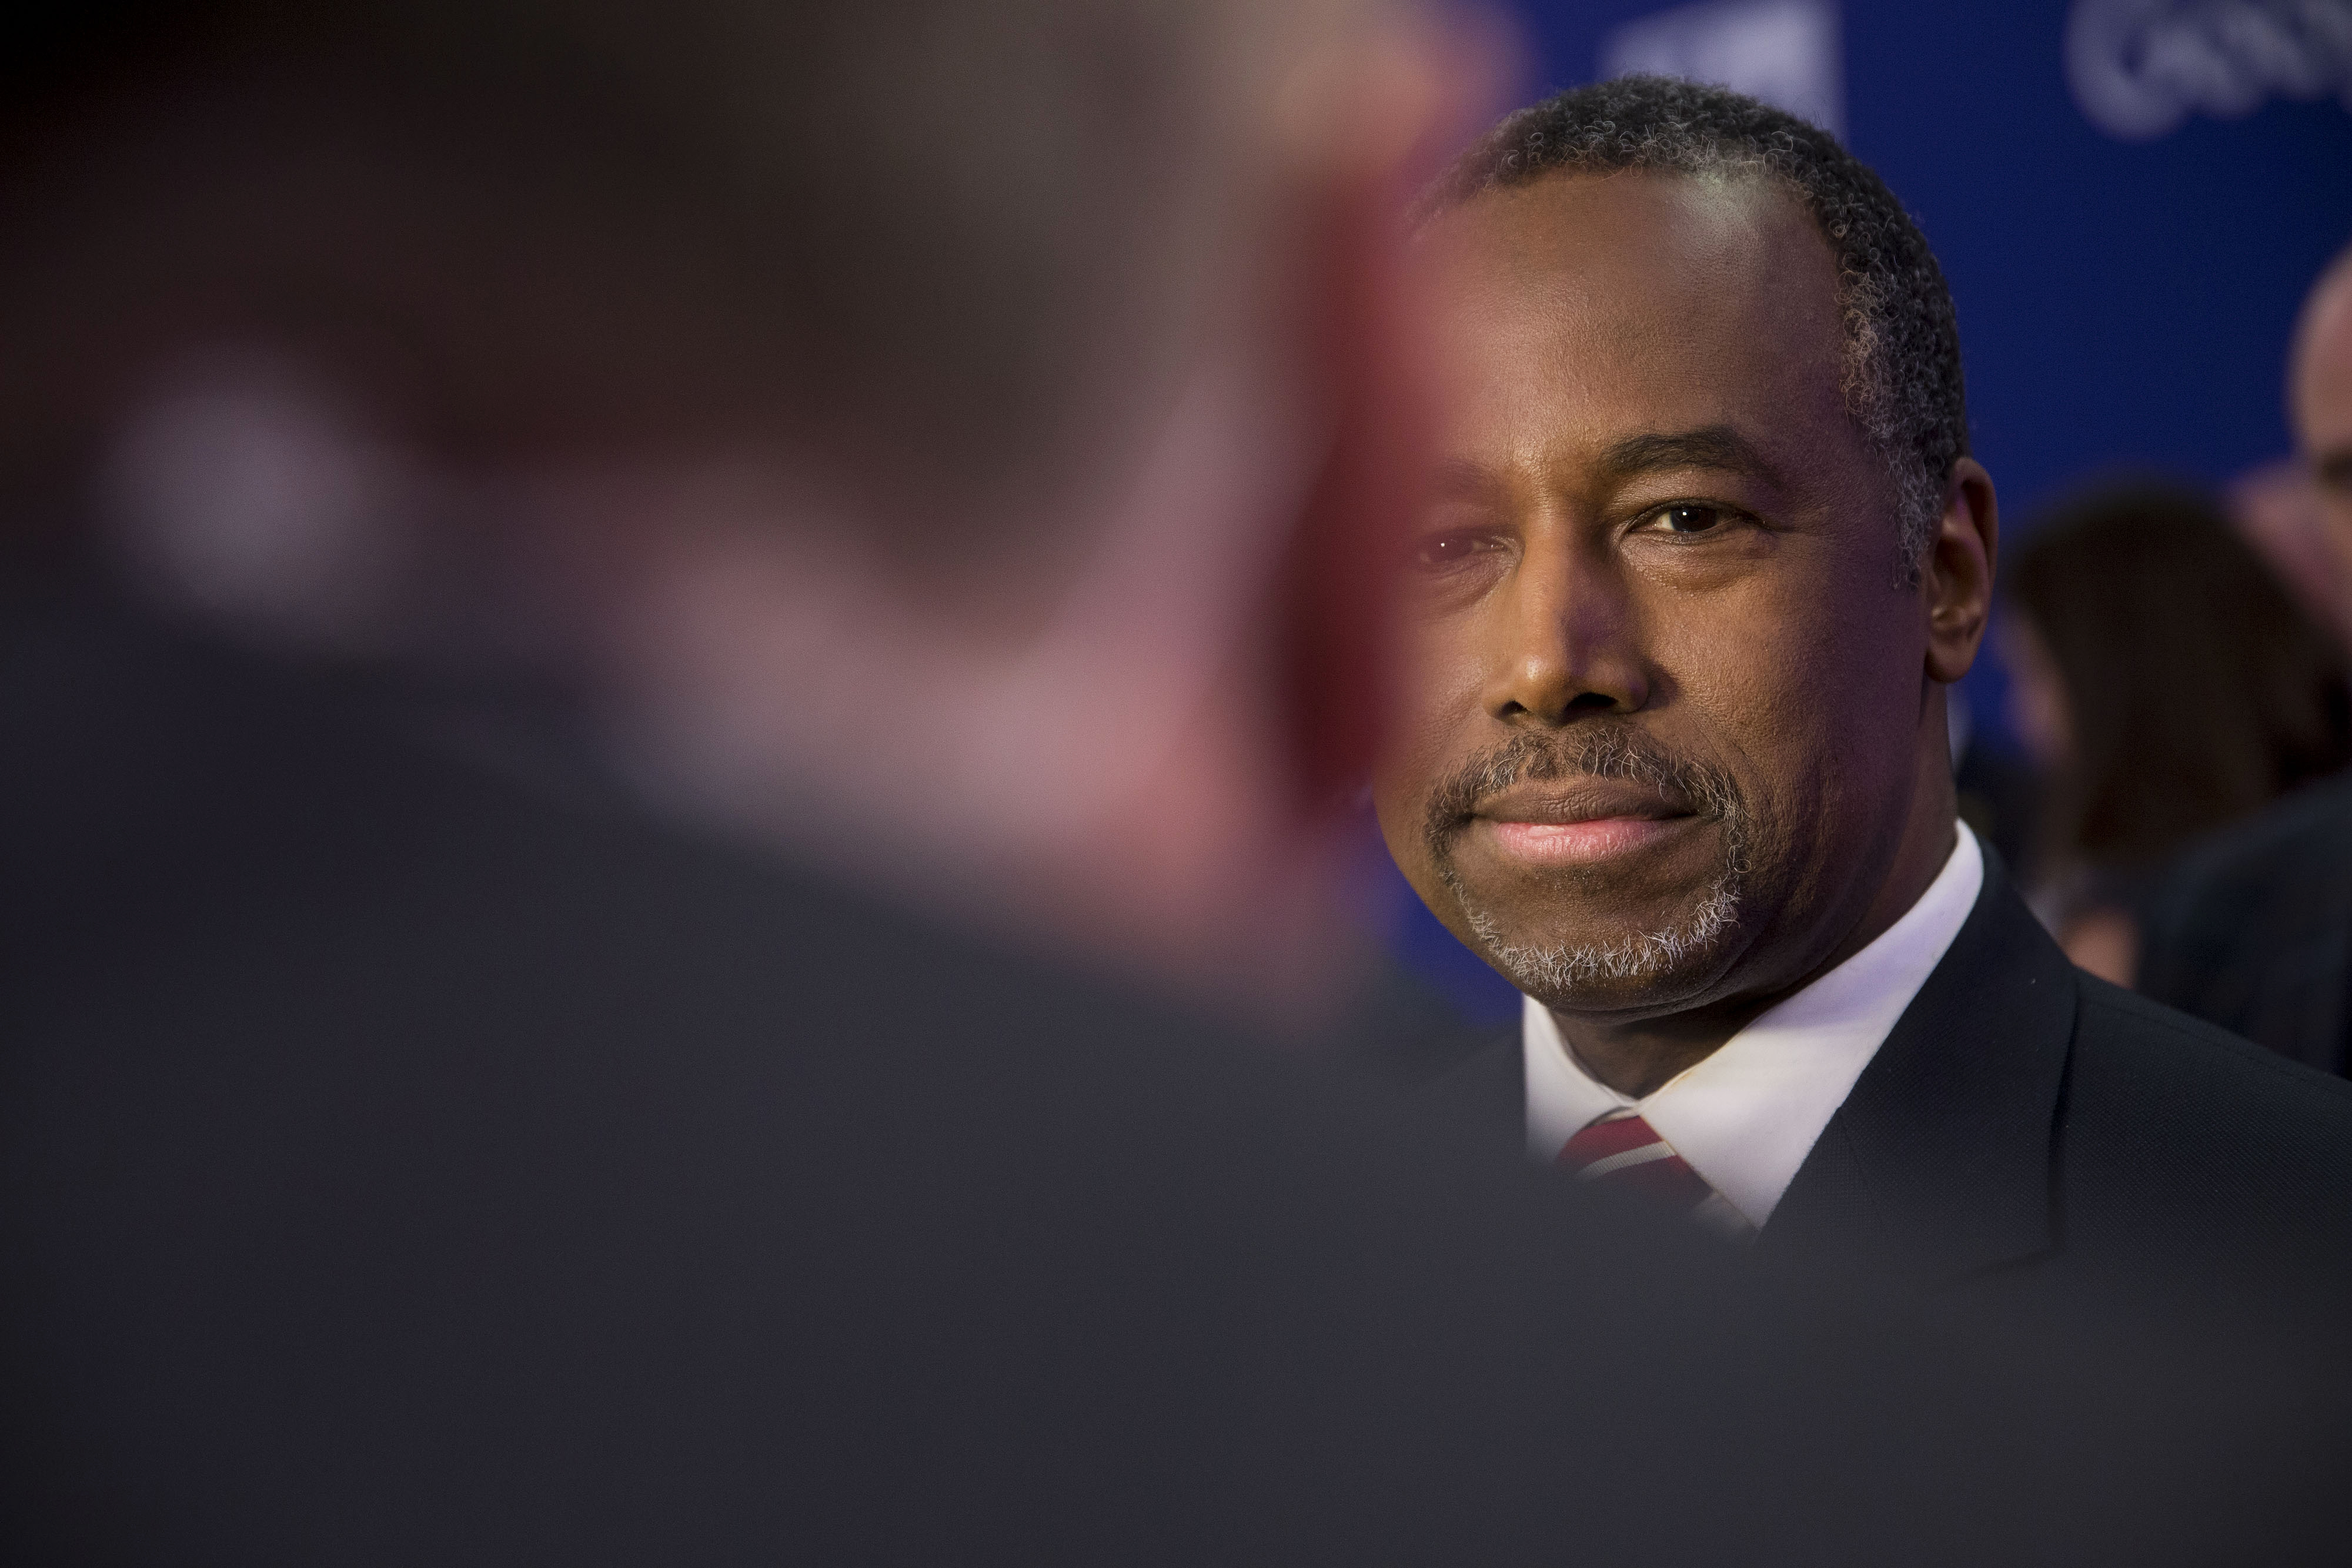 Ben Carson talks to a member of the media in the spin room following the Republican presidential candidate debate in Des Moines, Iowa on Jan. 28, 2016. (Daniel Acker—Bloomberg/Getty Images)